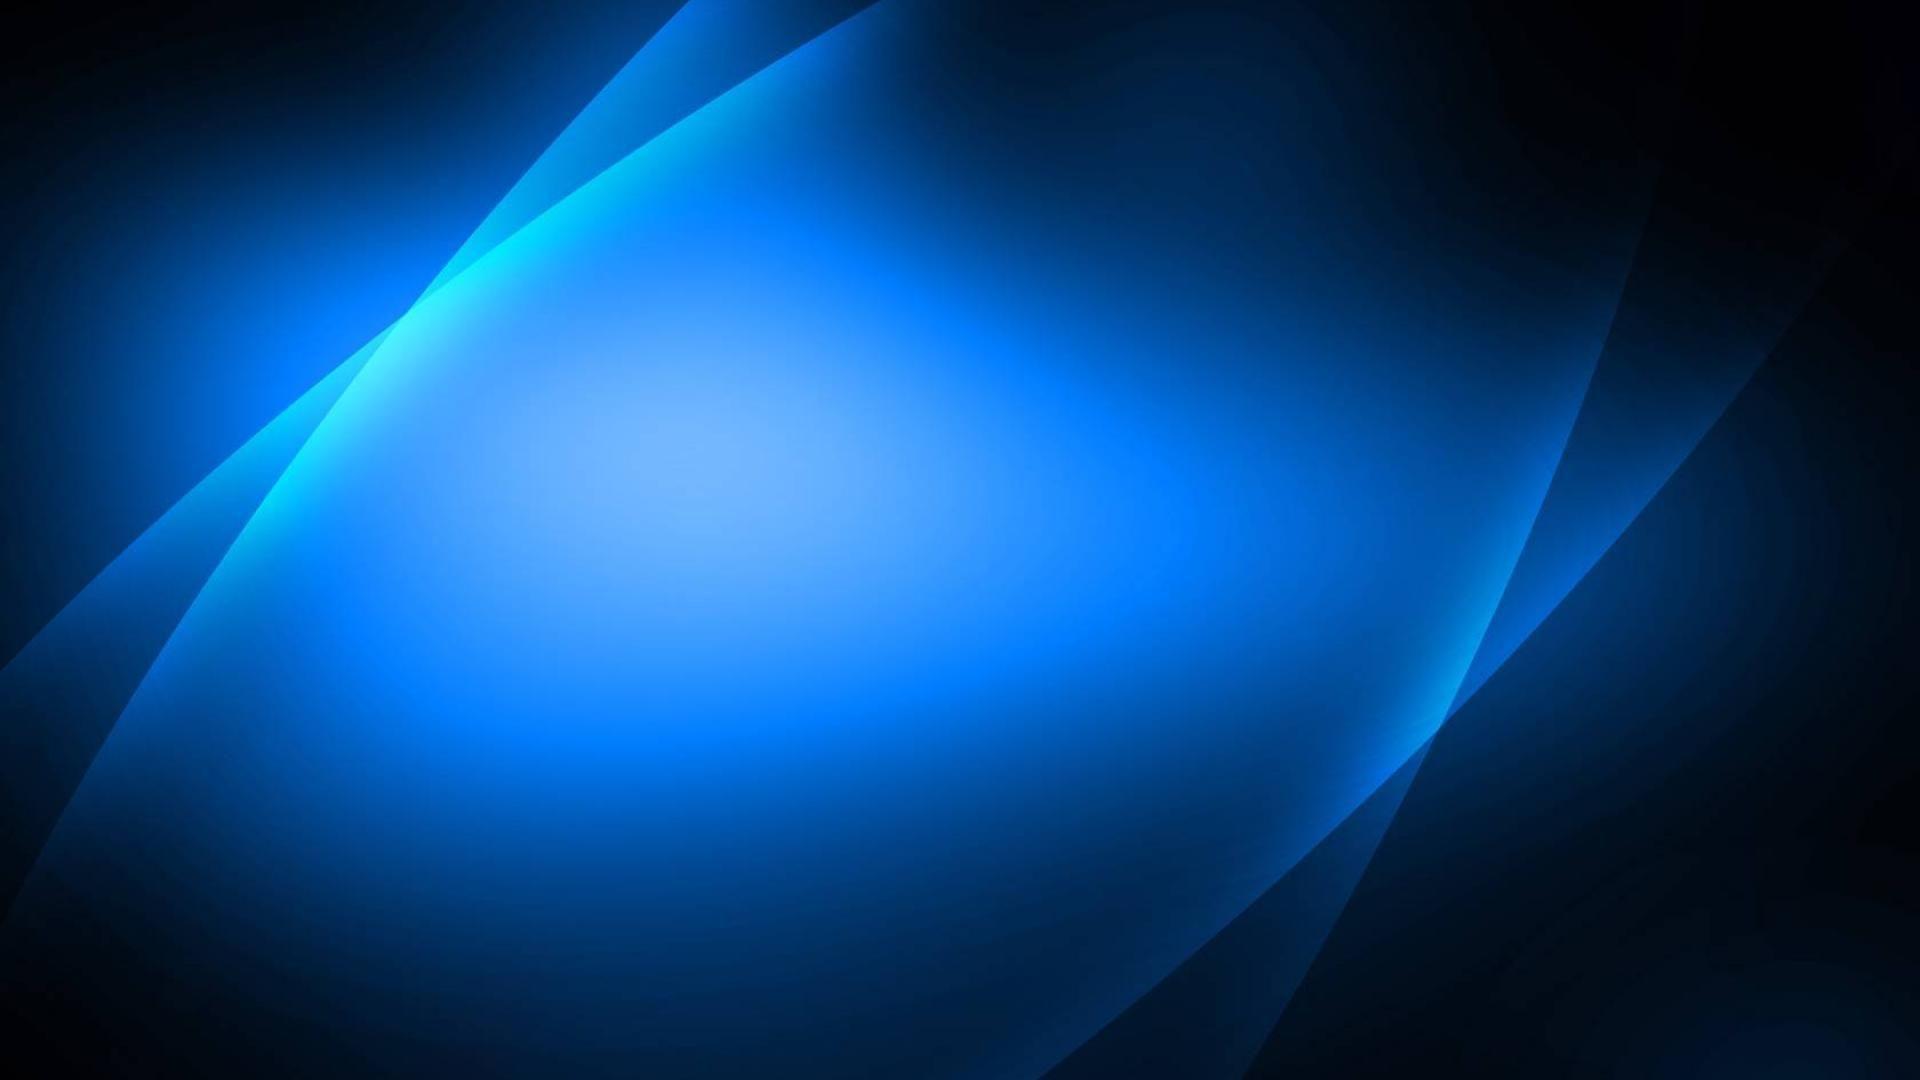 Dark Blue Abstract Background HD Picture 4 HD Wallpaper. Coisas